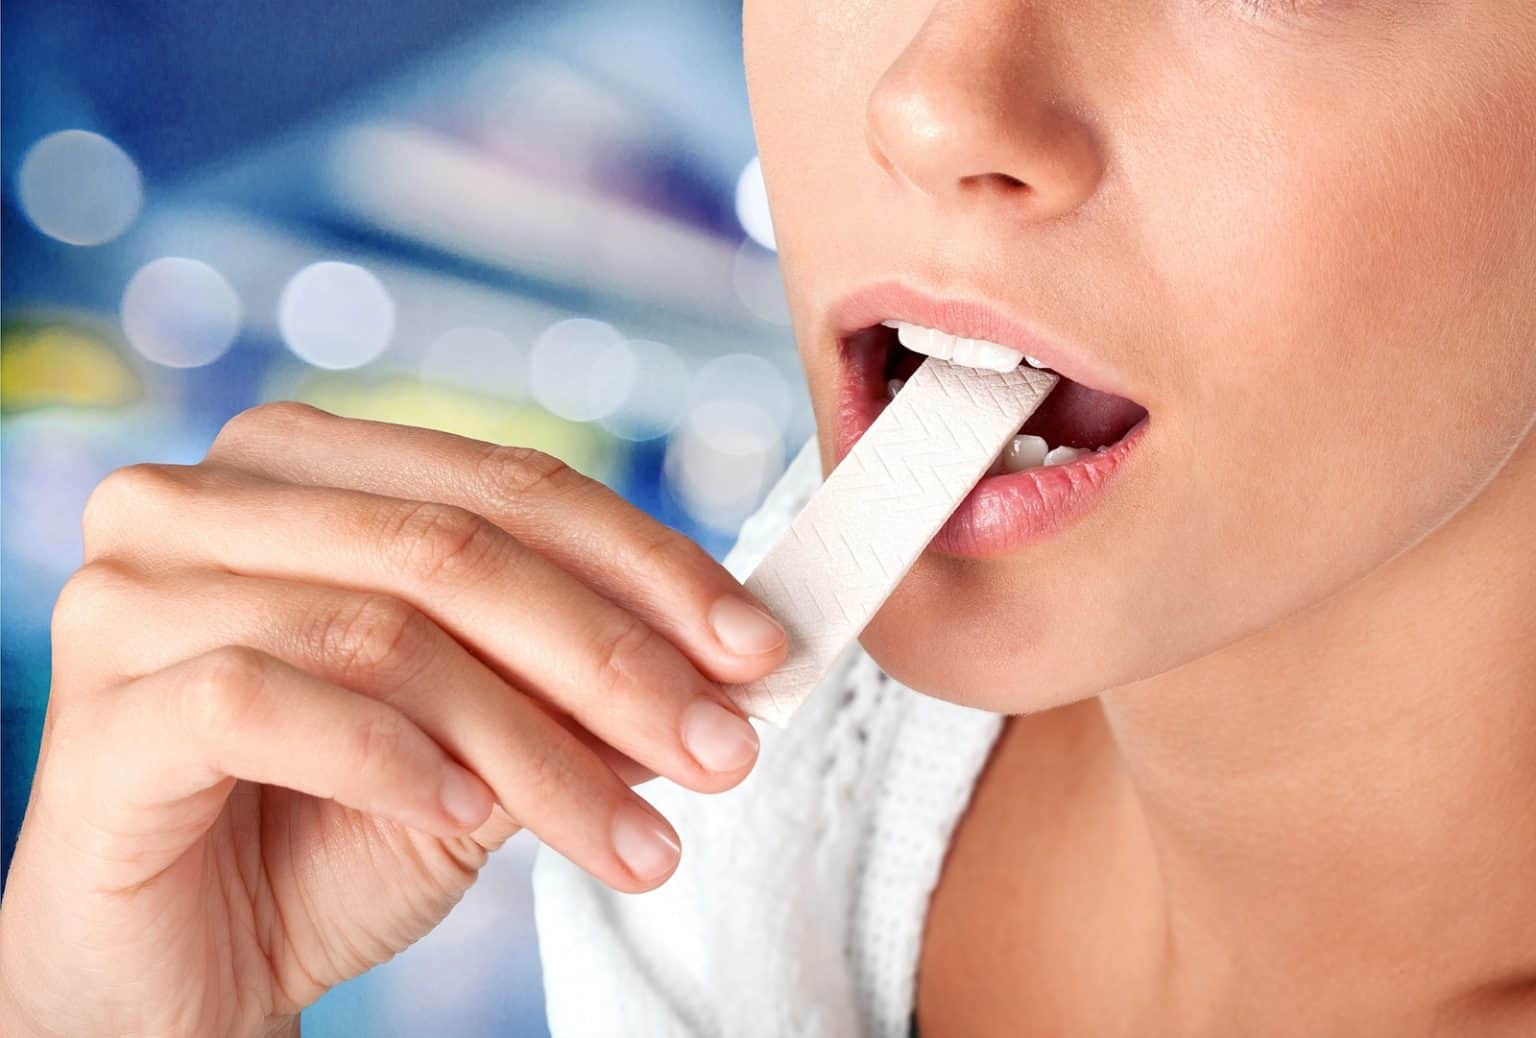 Does Chewing Gum Really Clean Your Mouth